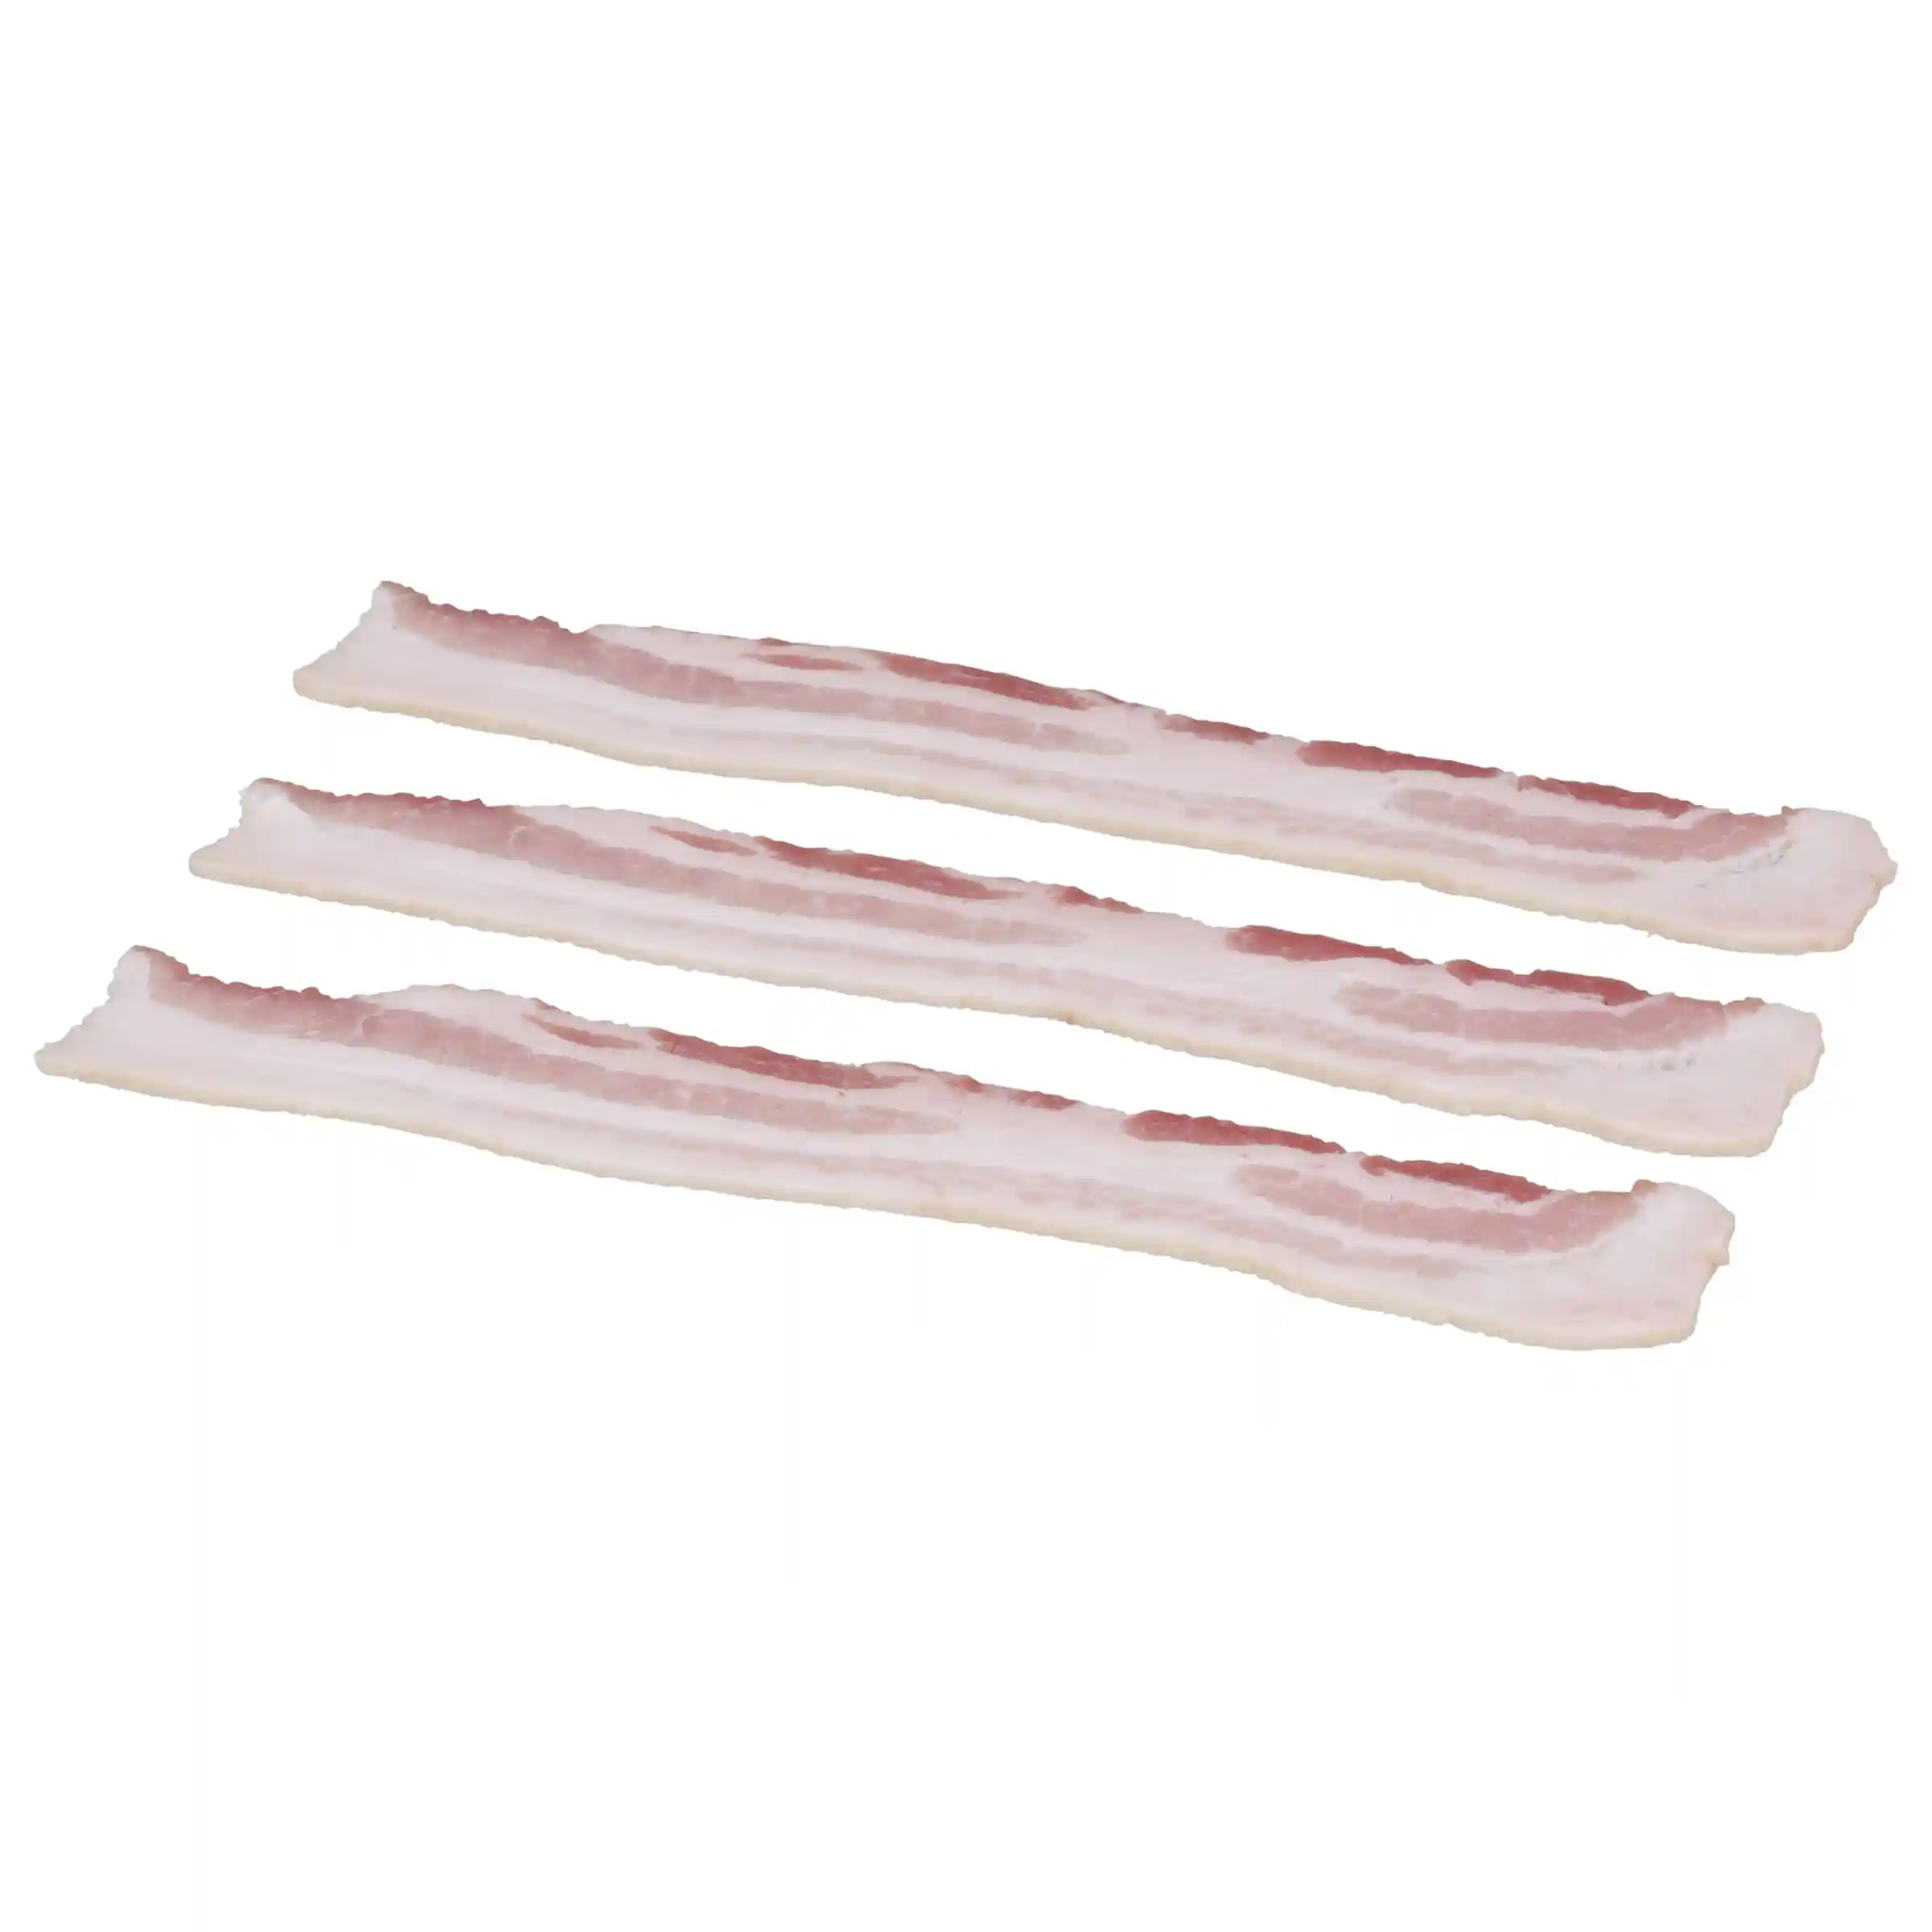 Wright® Brand Naturally Applewood Smoked Thick Sliced Bacon, Bulk, 10-14 Slices per Pound, Gas Flushed_image_11